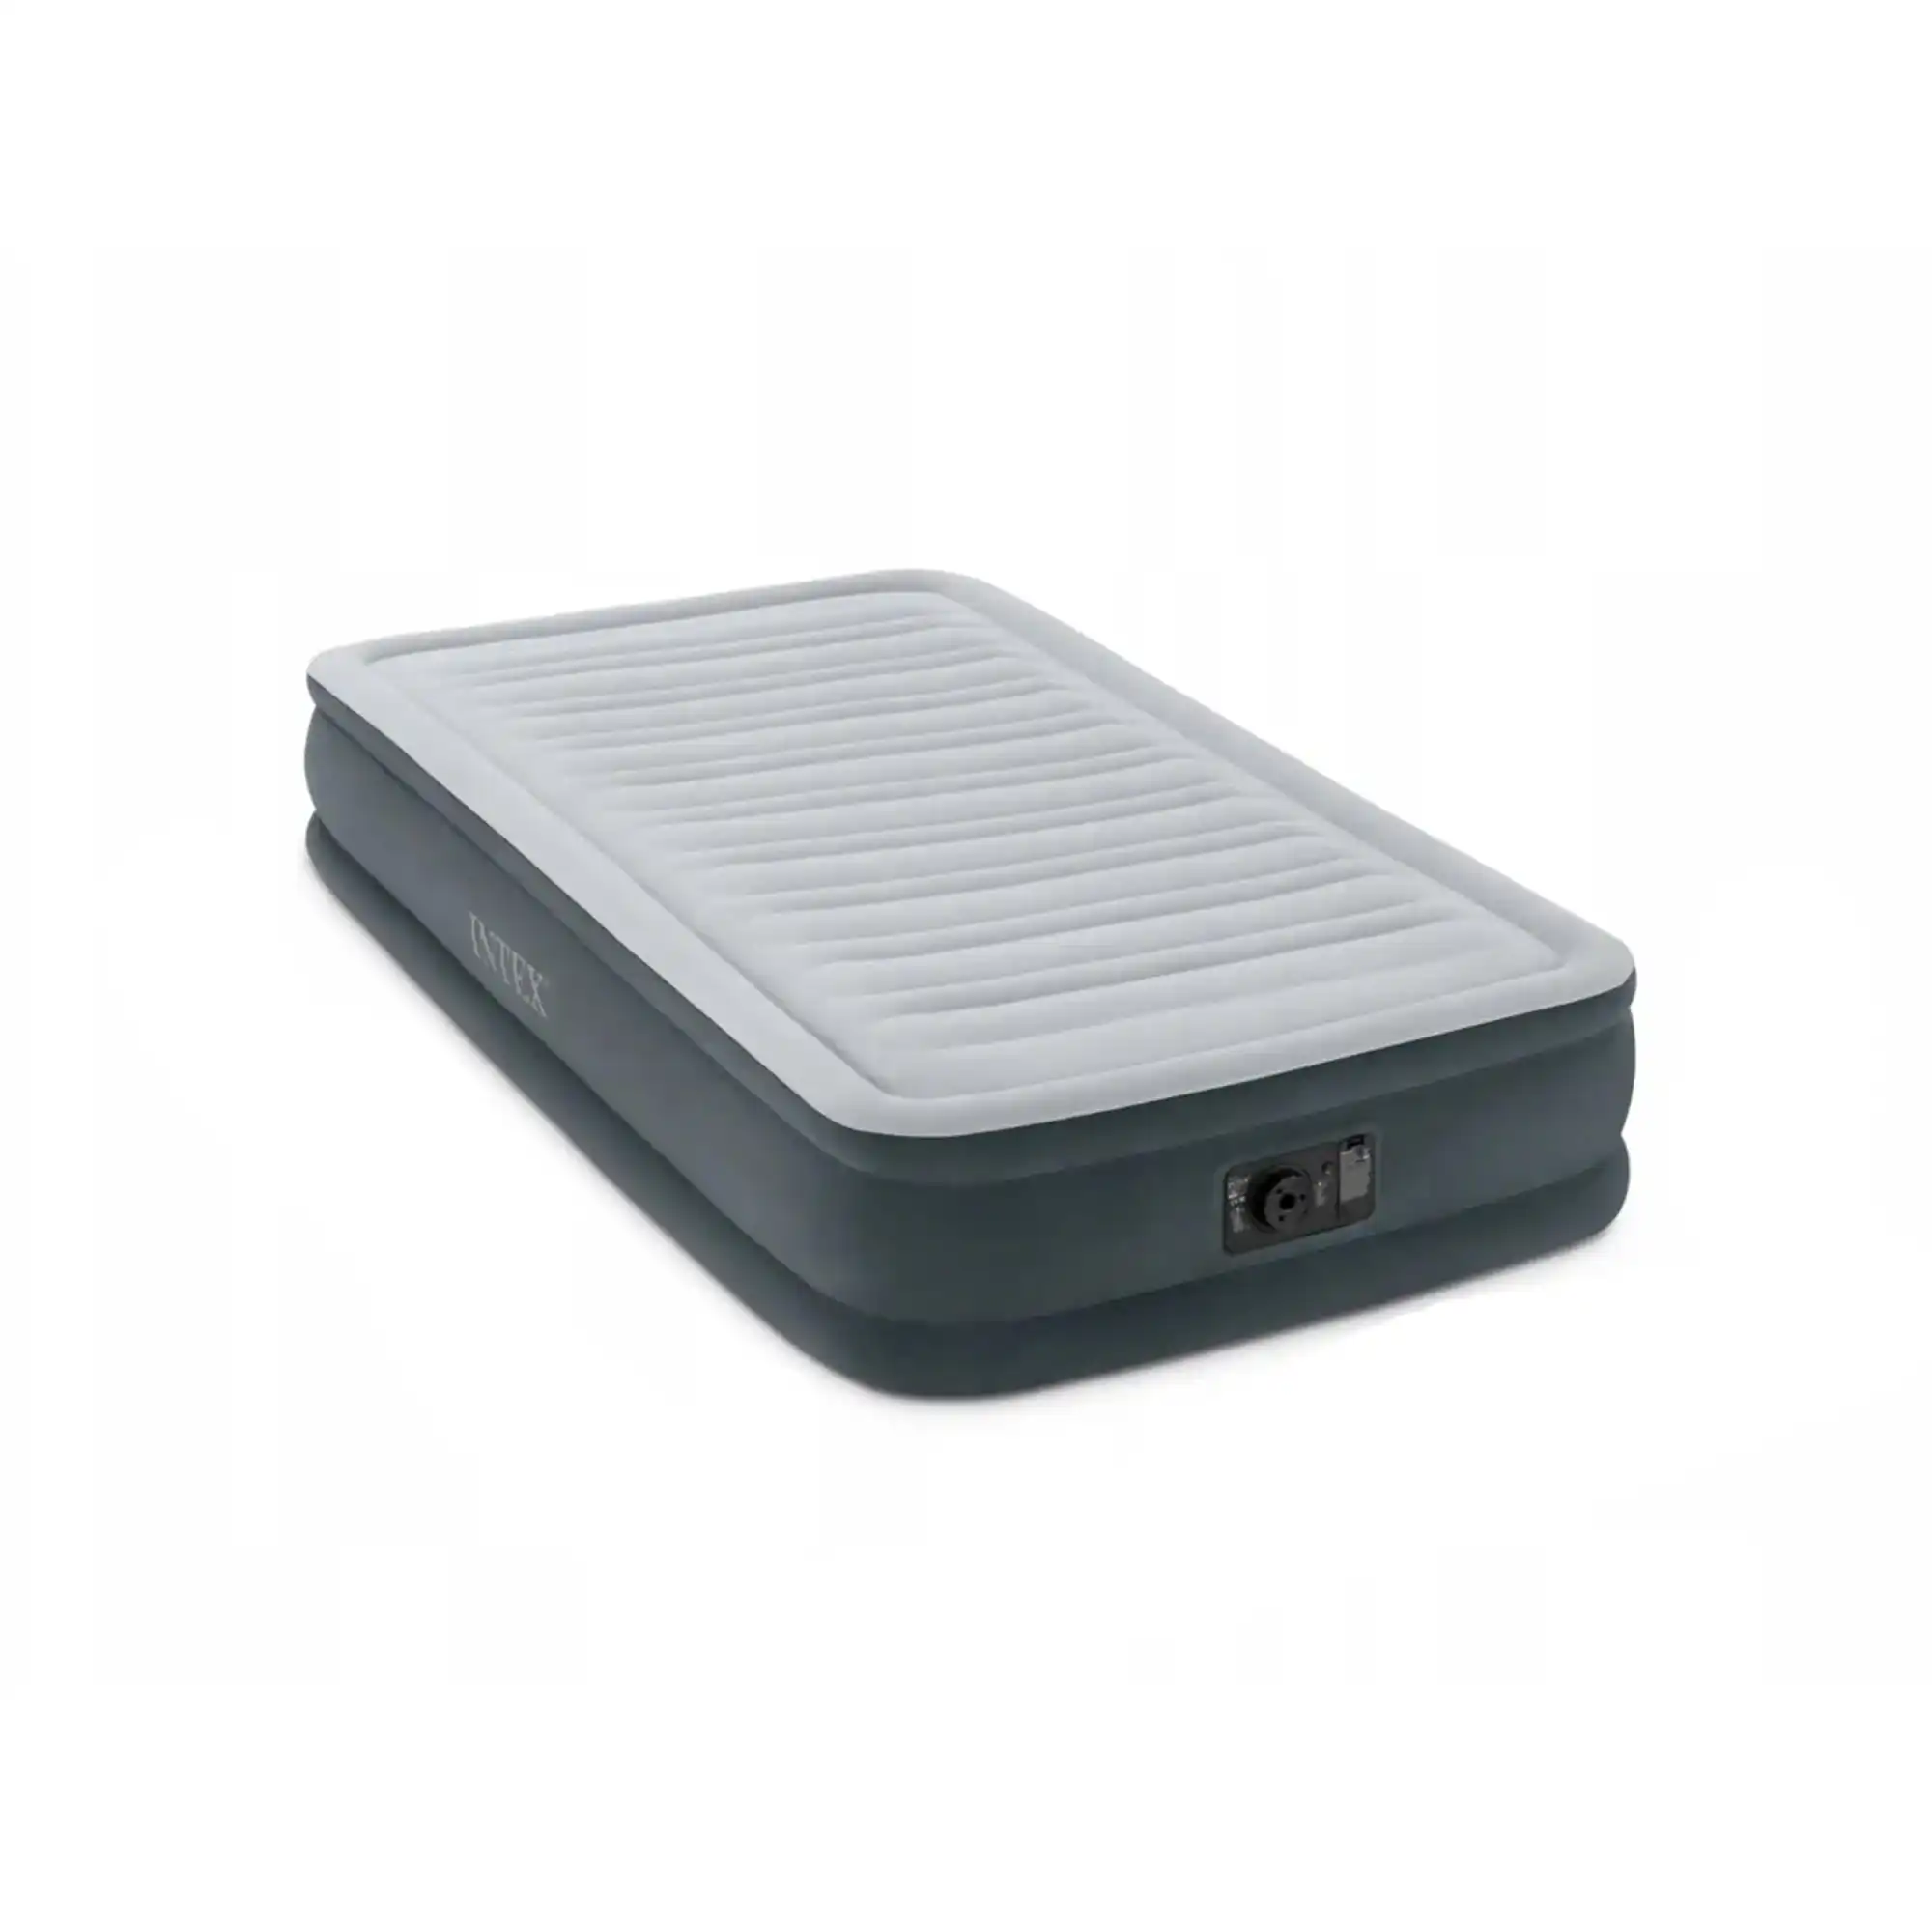 Twin Comfort-plush Mid-Rise Airbed